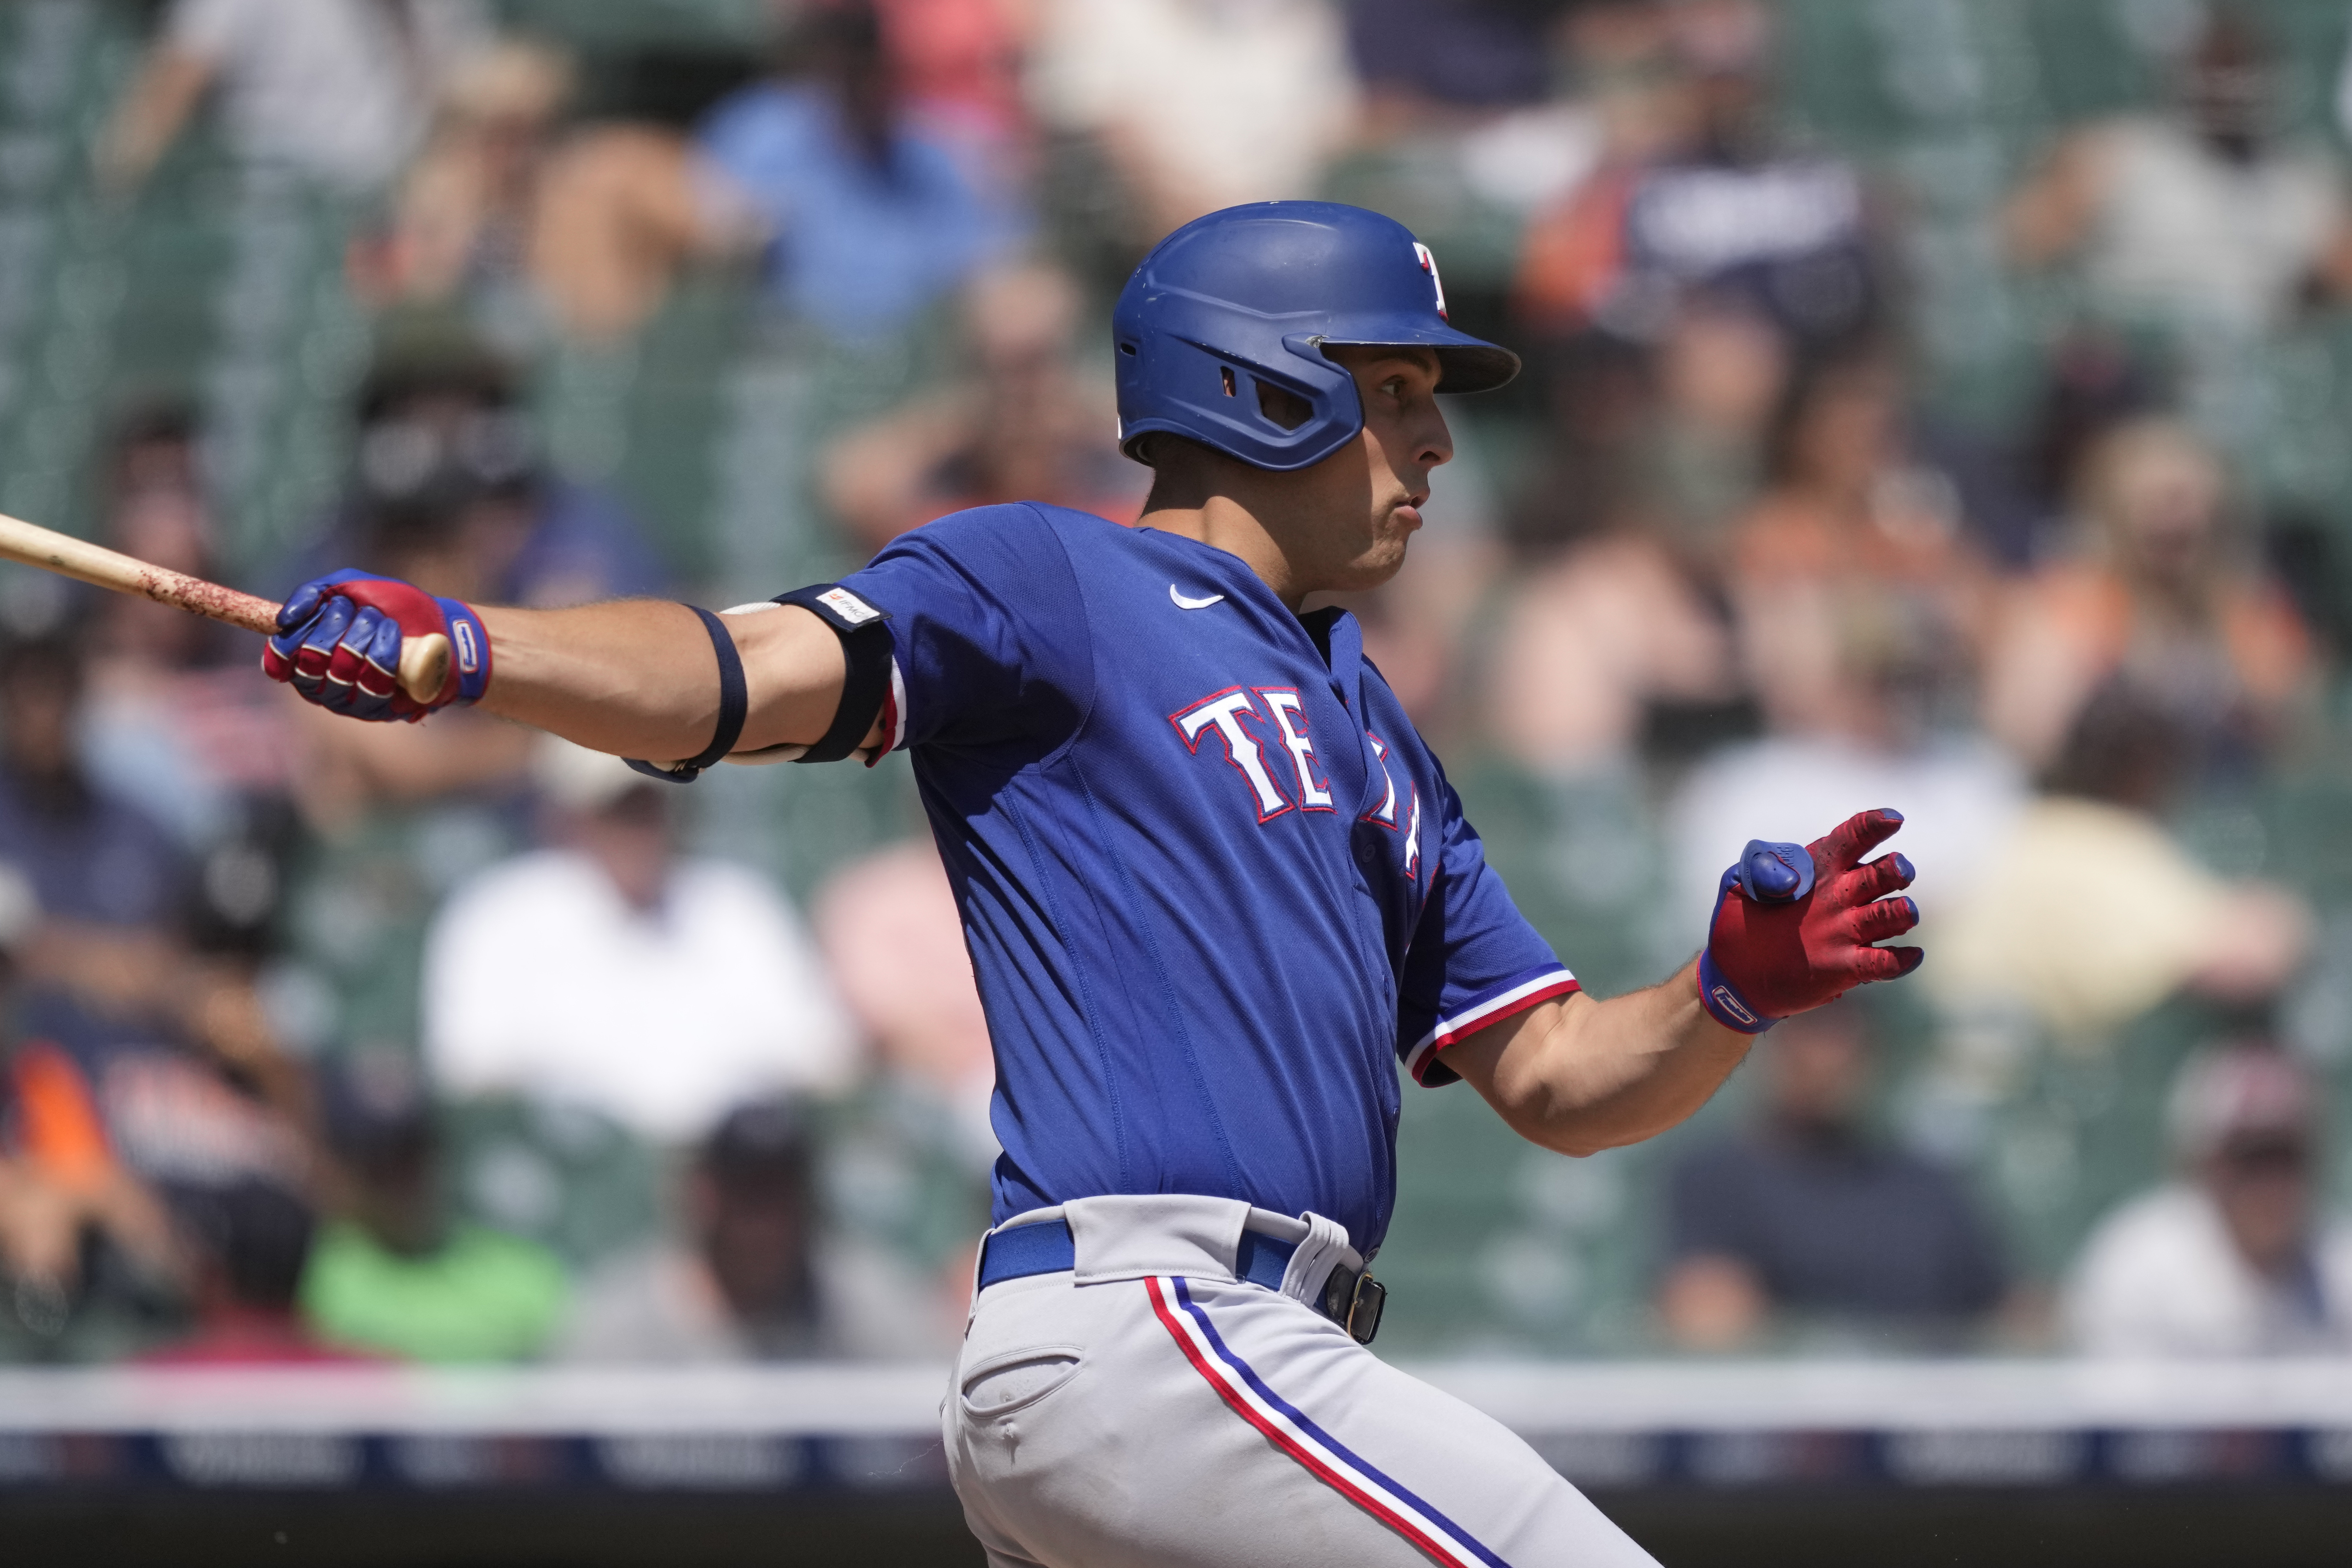 Despite loss to Tigers, Rangers end May with best 55-game start in